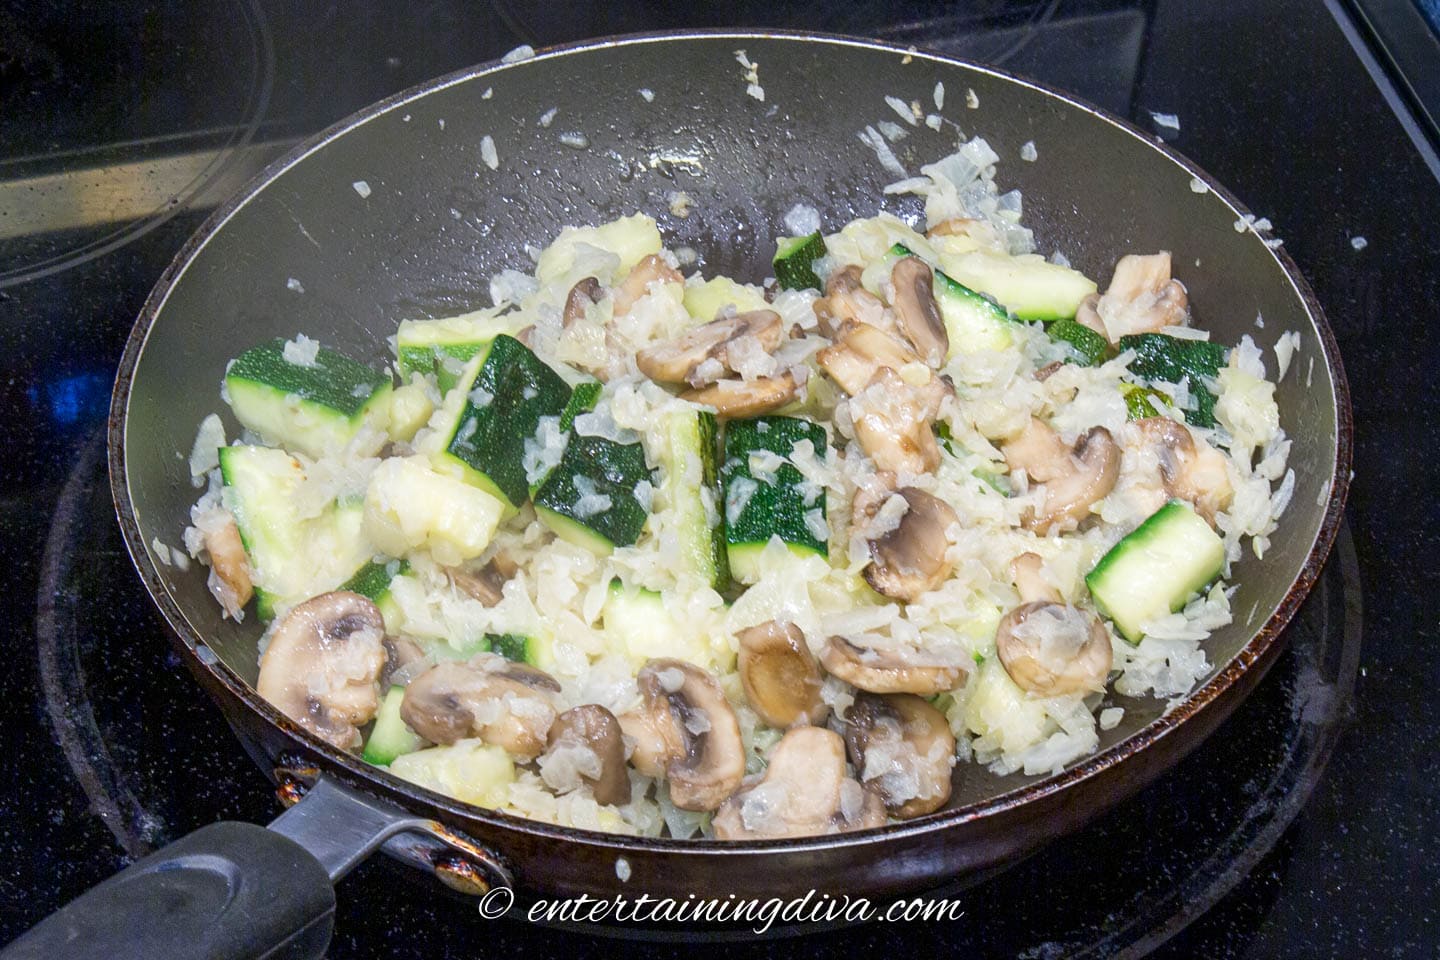 zucchini, mushrooms and onions in a saute pan